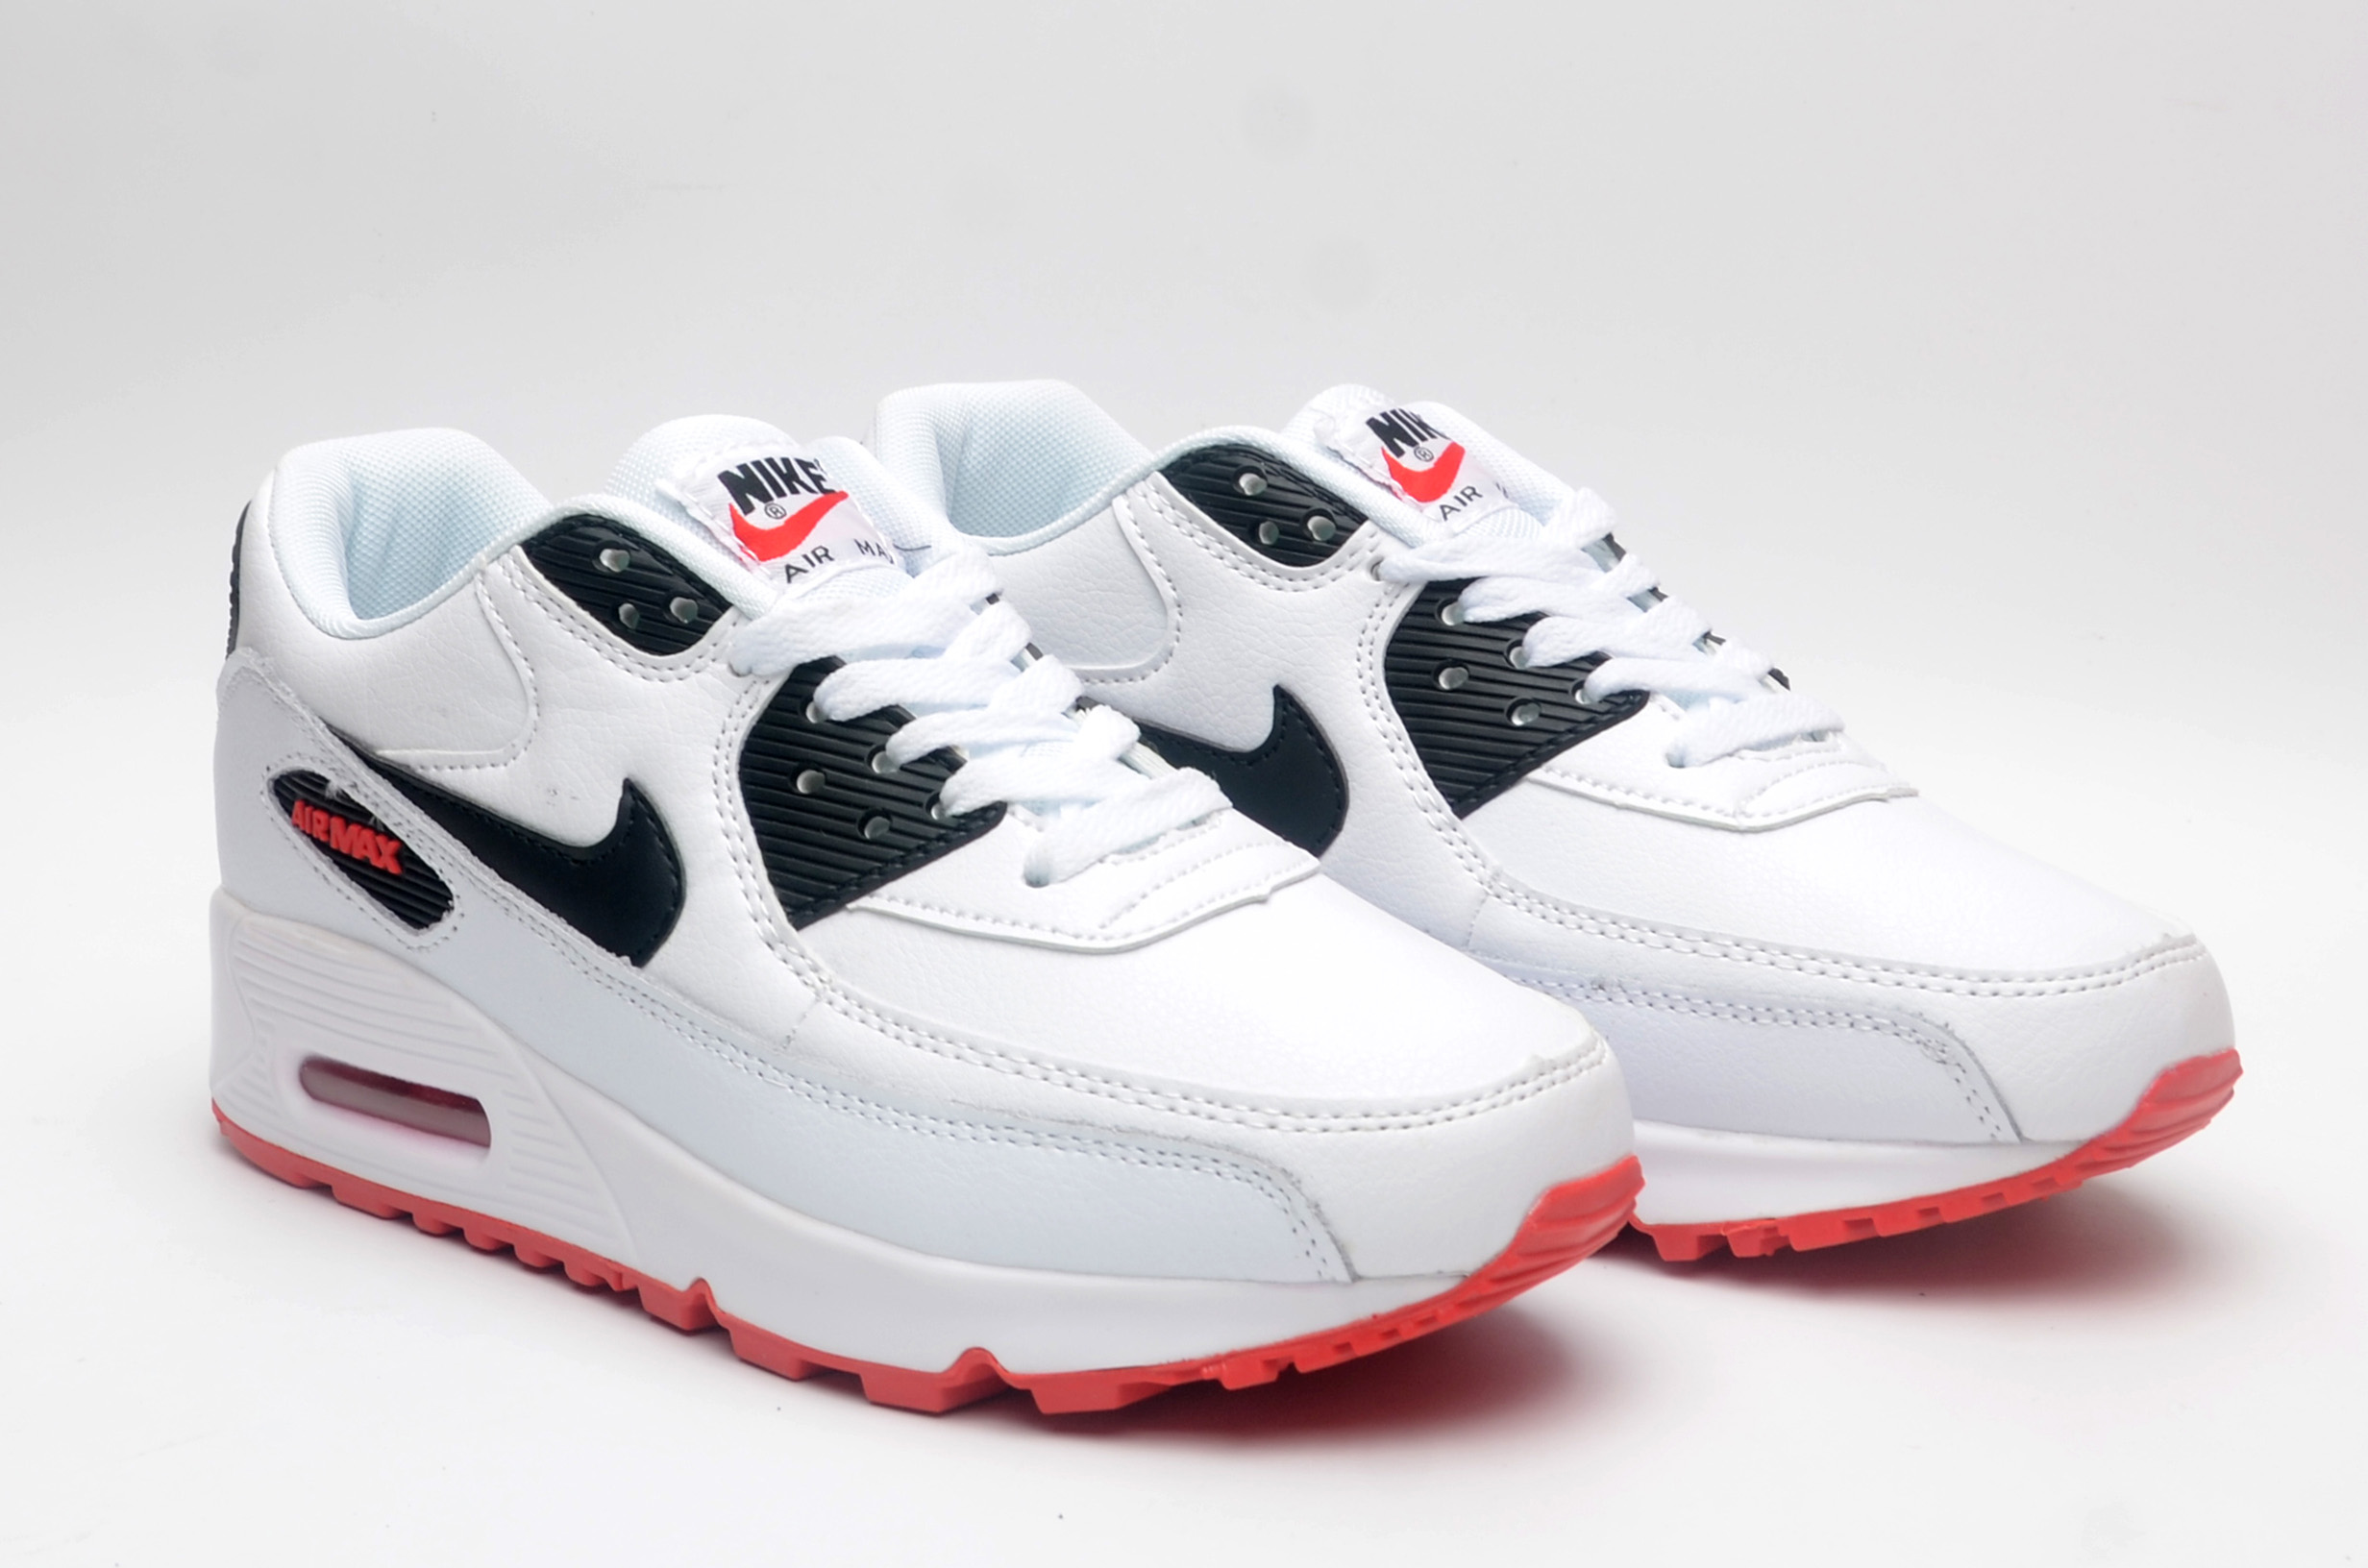 Men's Running weapon Air Max 90 Shoes 036